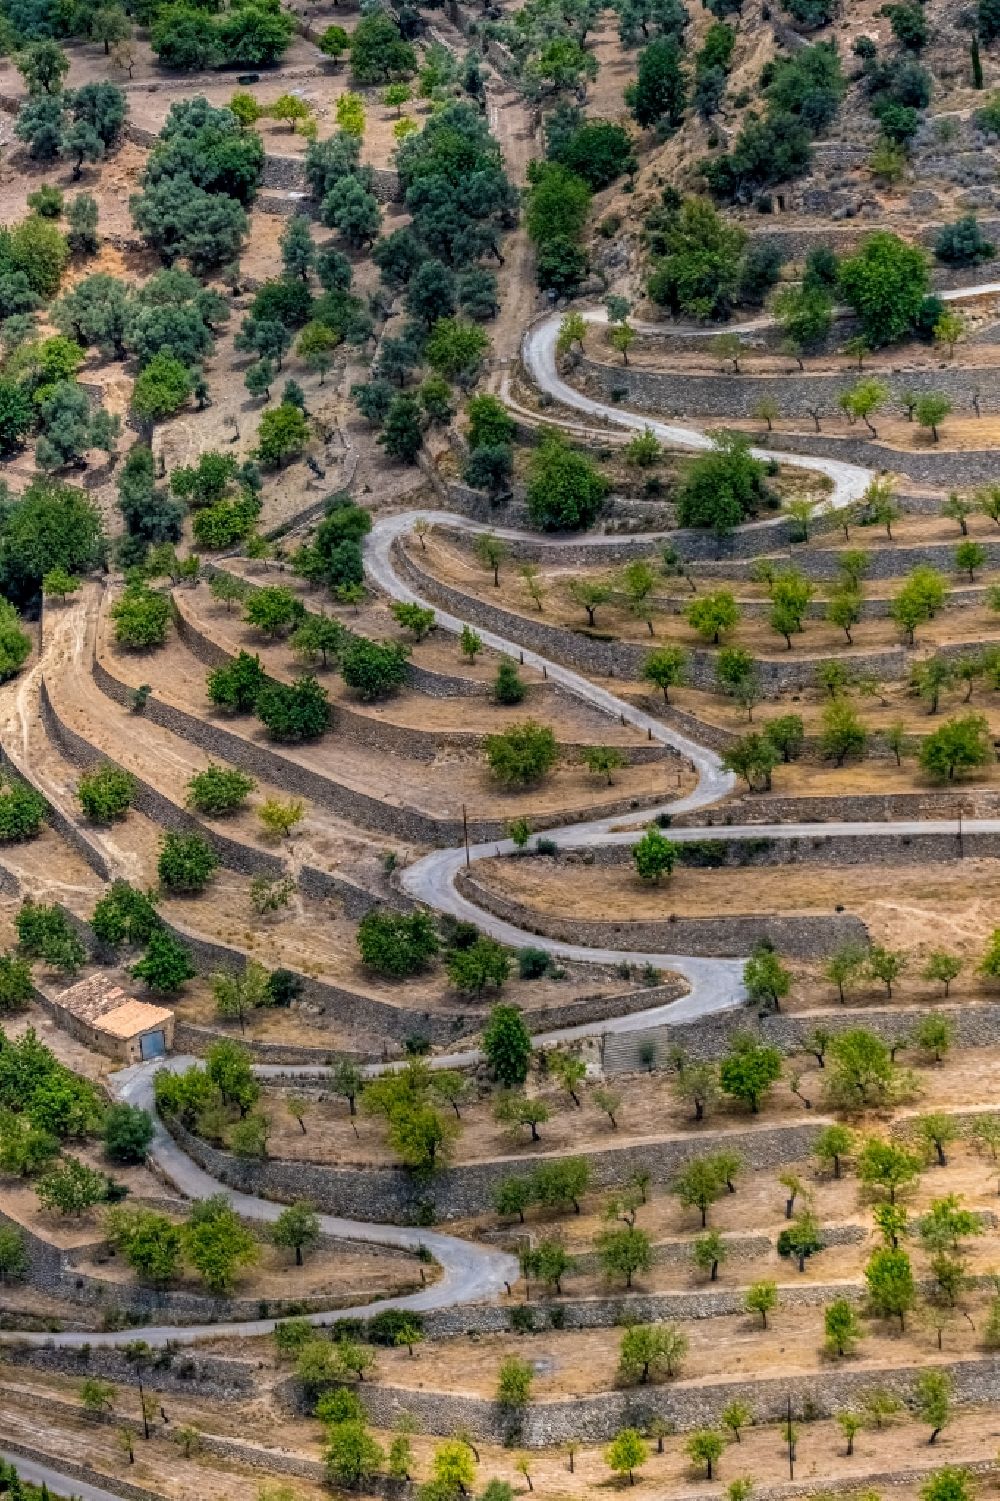 Bunyola from above - Serpentine-shaped curve of a road guide on the terraced landscape along the Ma-202 in Bunyola in Balearic island of Mallorca, Spain